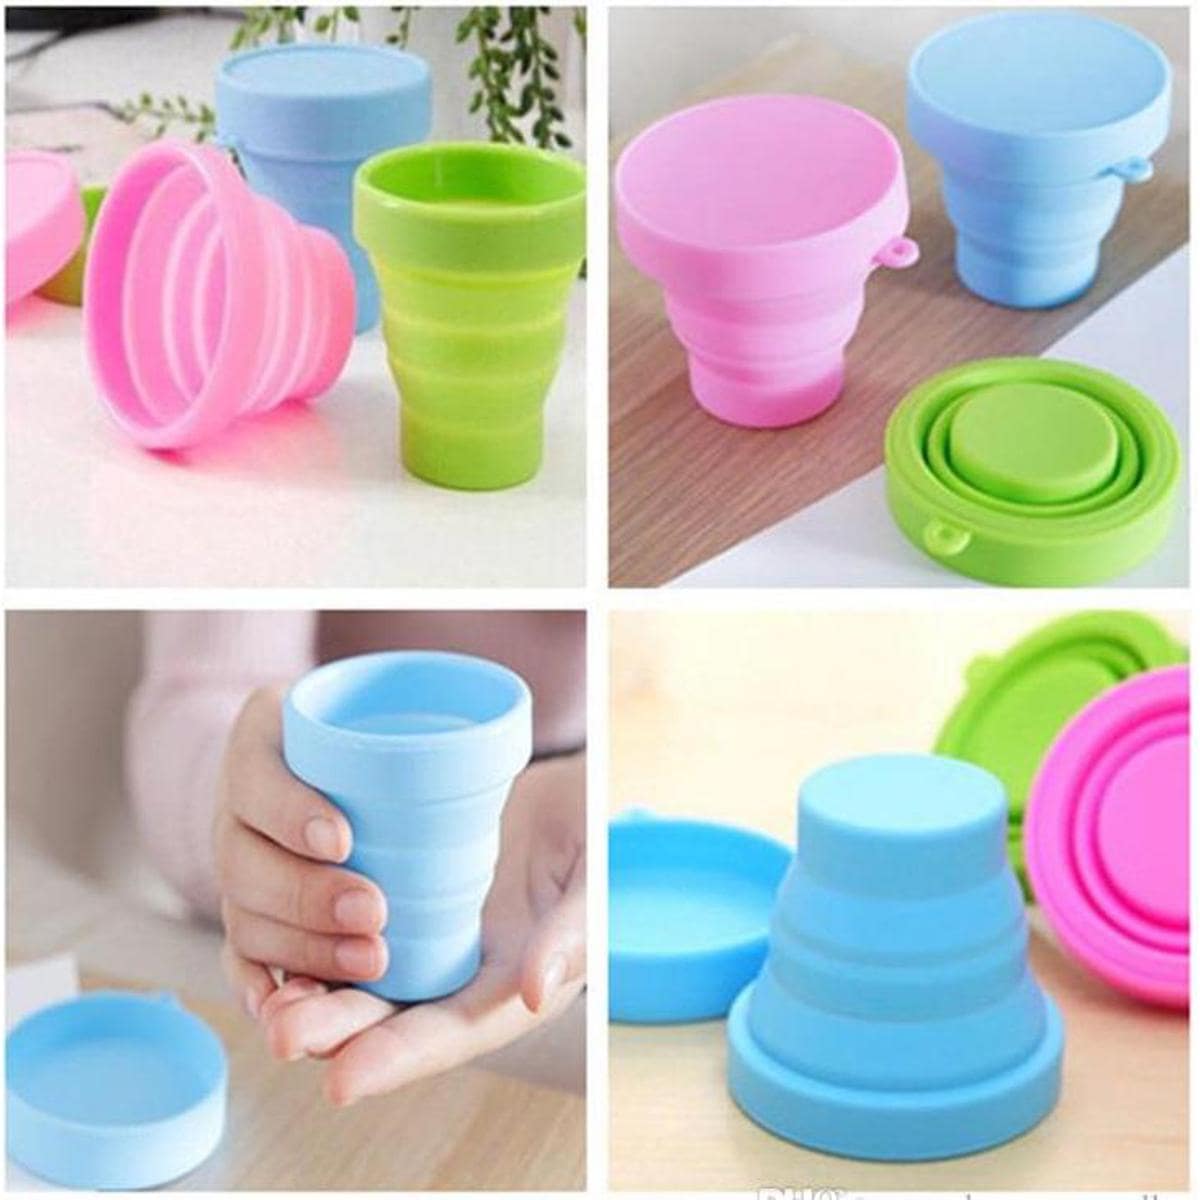 Silicone Collapsible Travel Sport Folding Cup